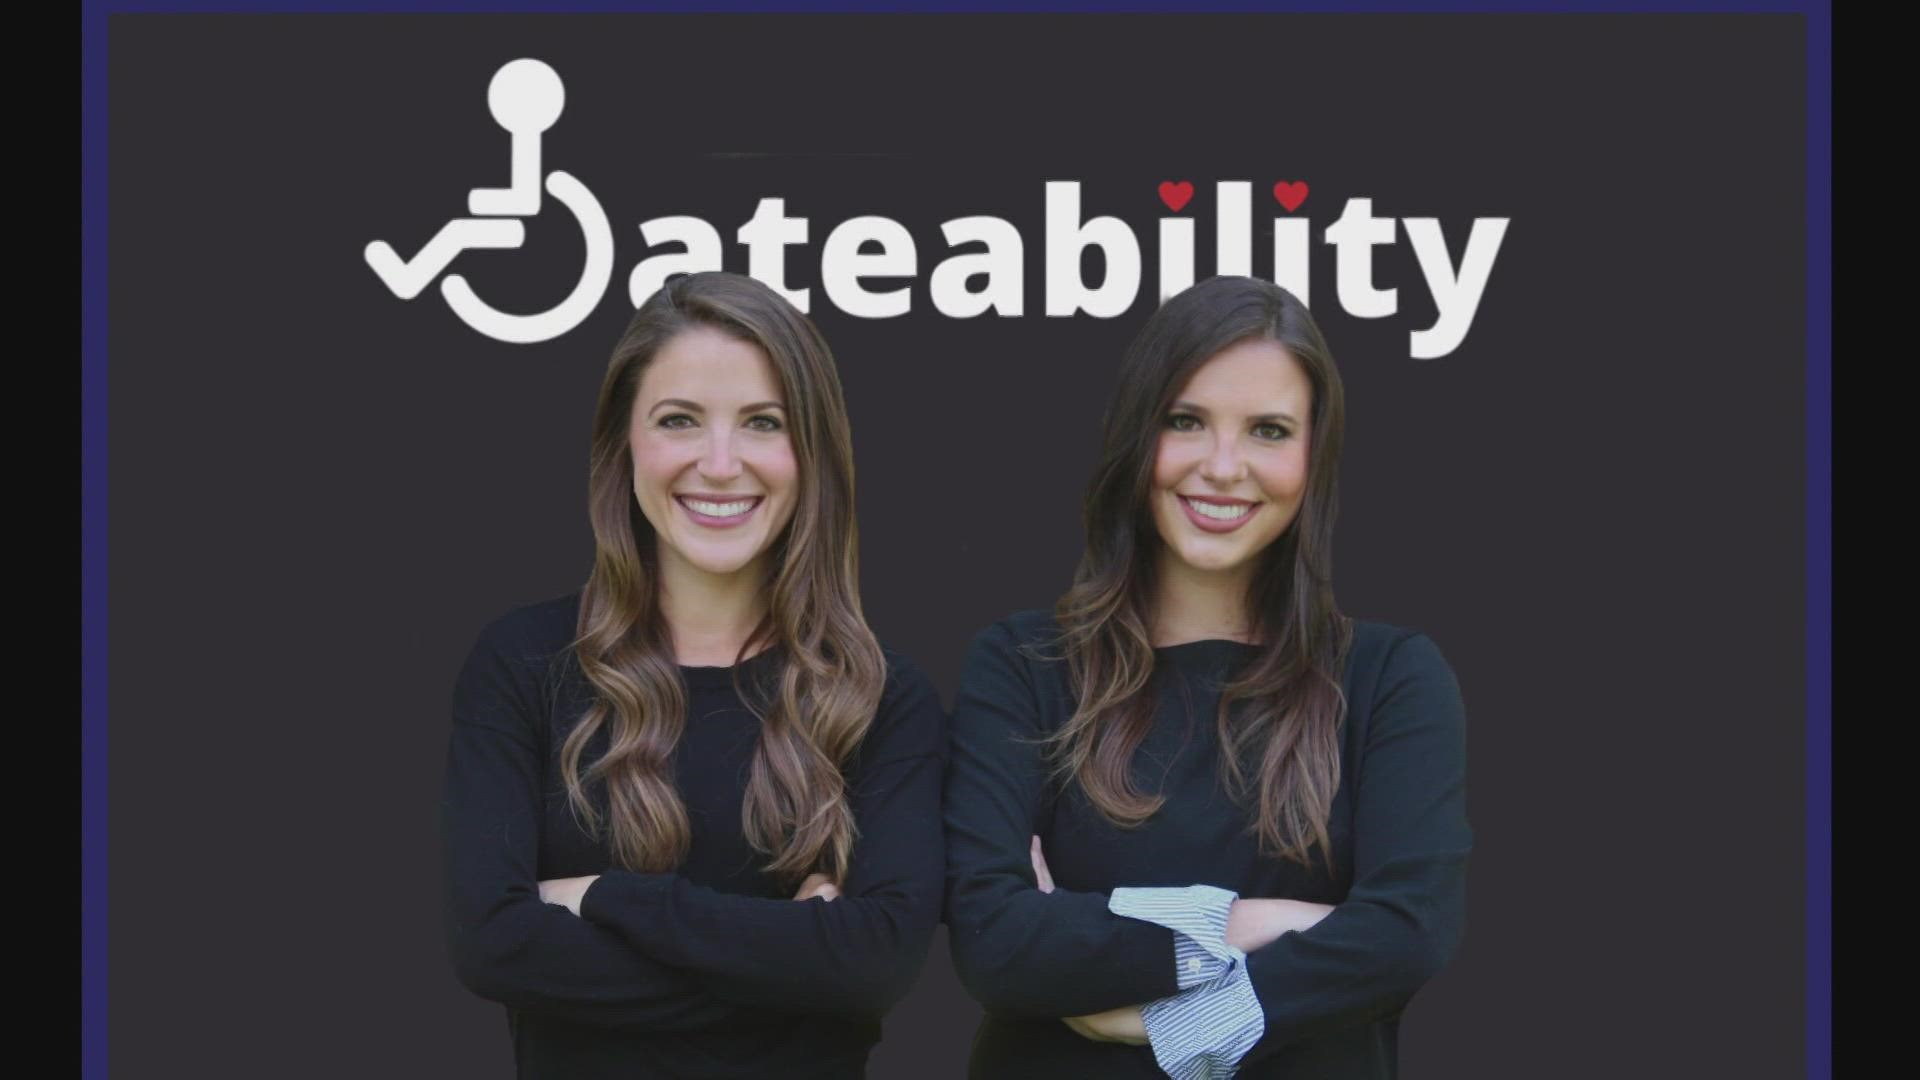 The Dateability app looks to eliminate some uncomfortable conversations around health issues and accessibility.